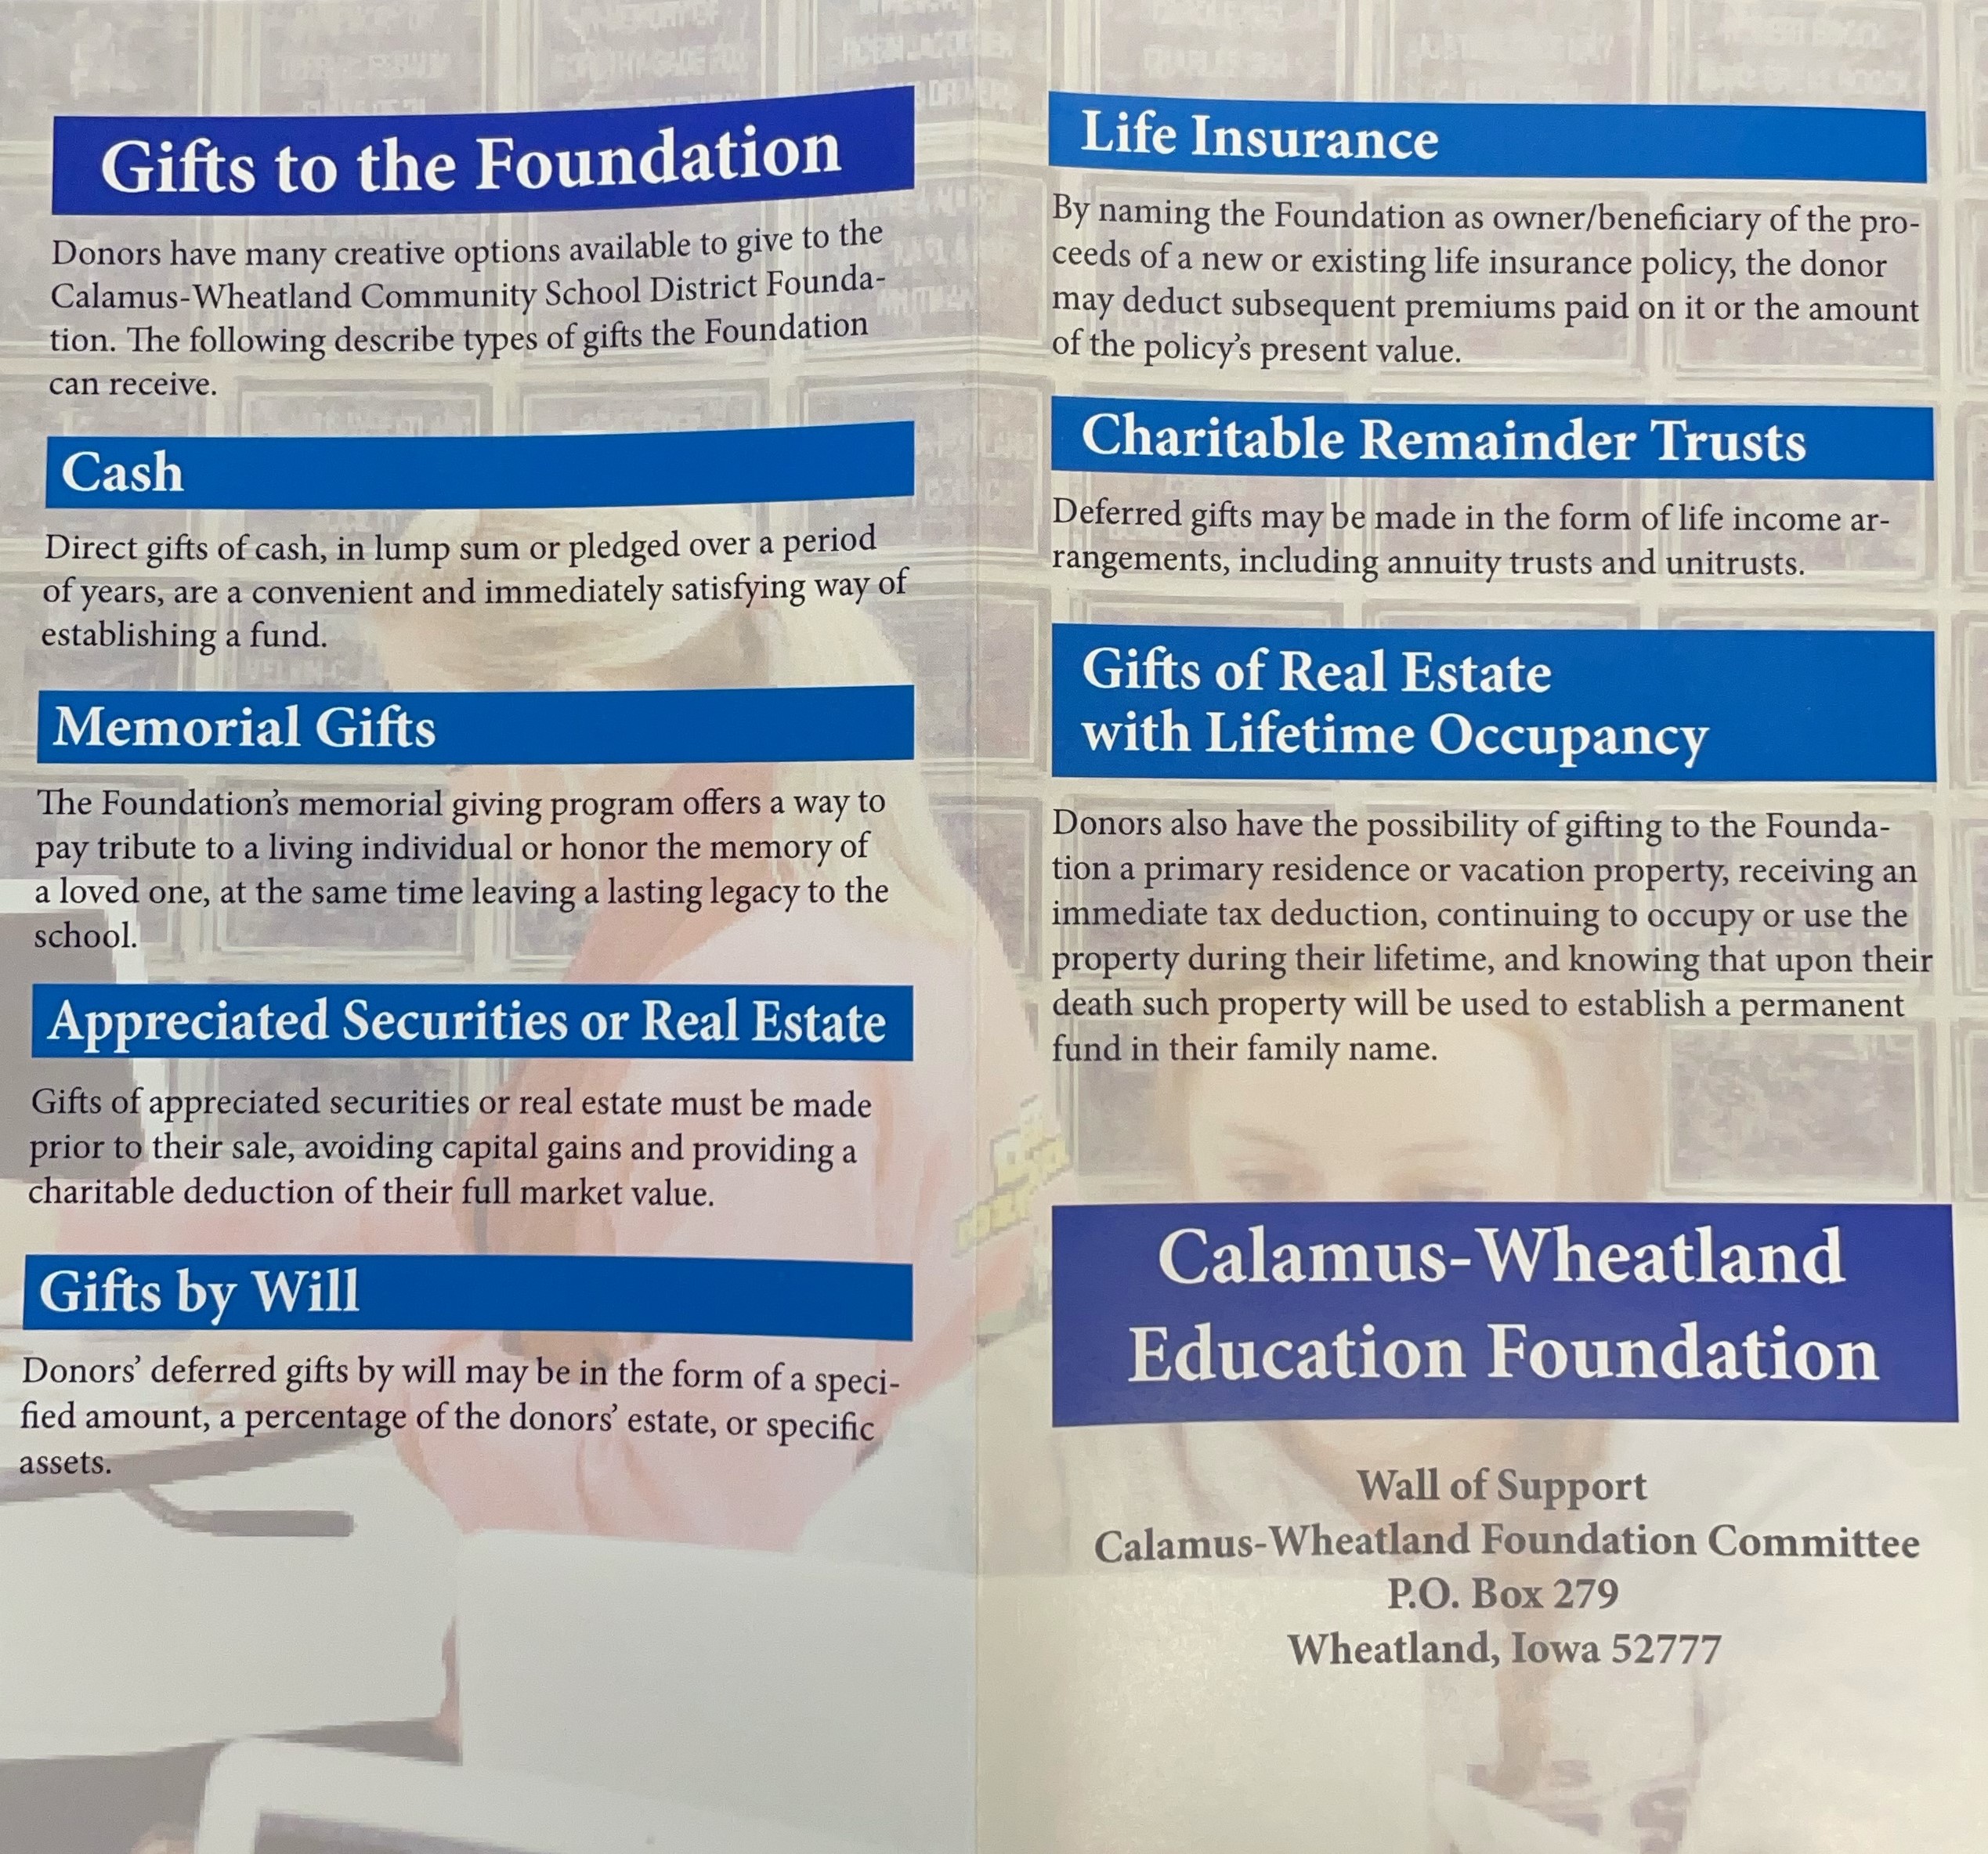 Gifts to the Foundation